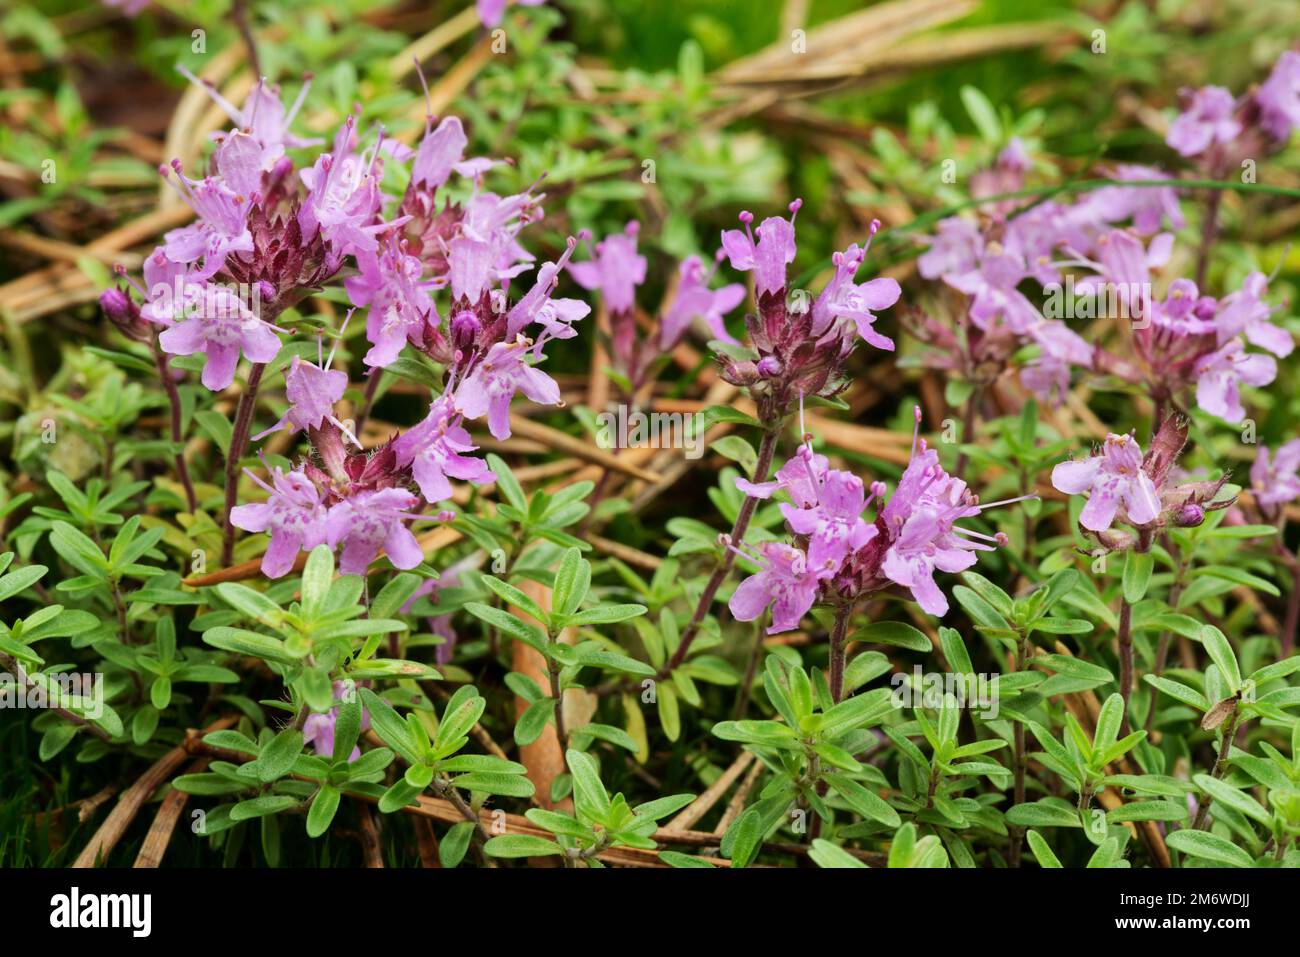 Flower of a small useful plant wild thyme (Thymus serpyllum) Stock Photo